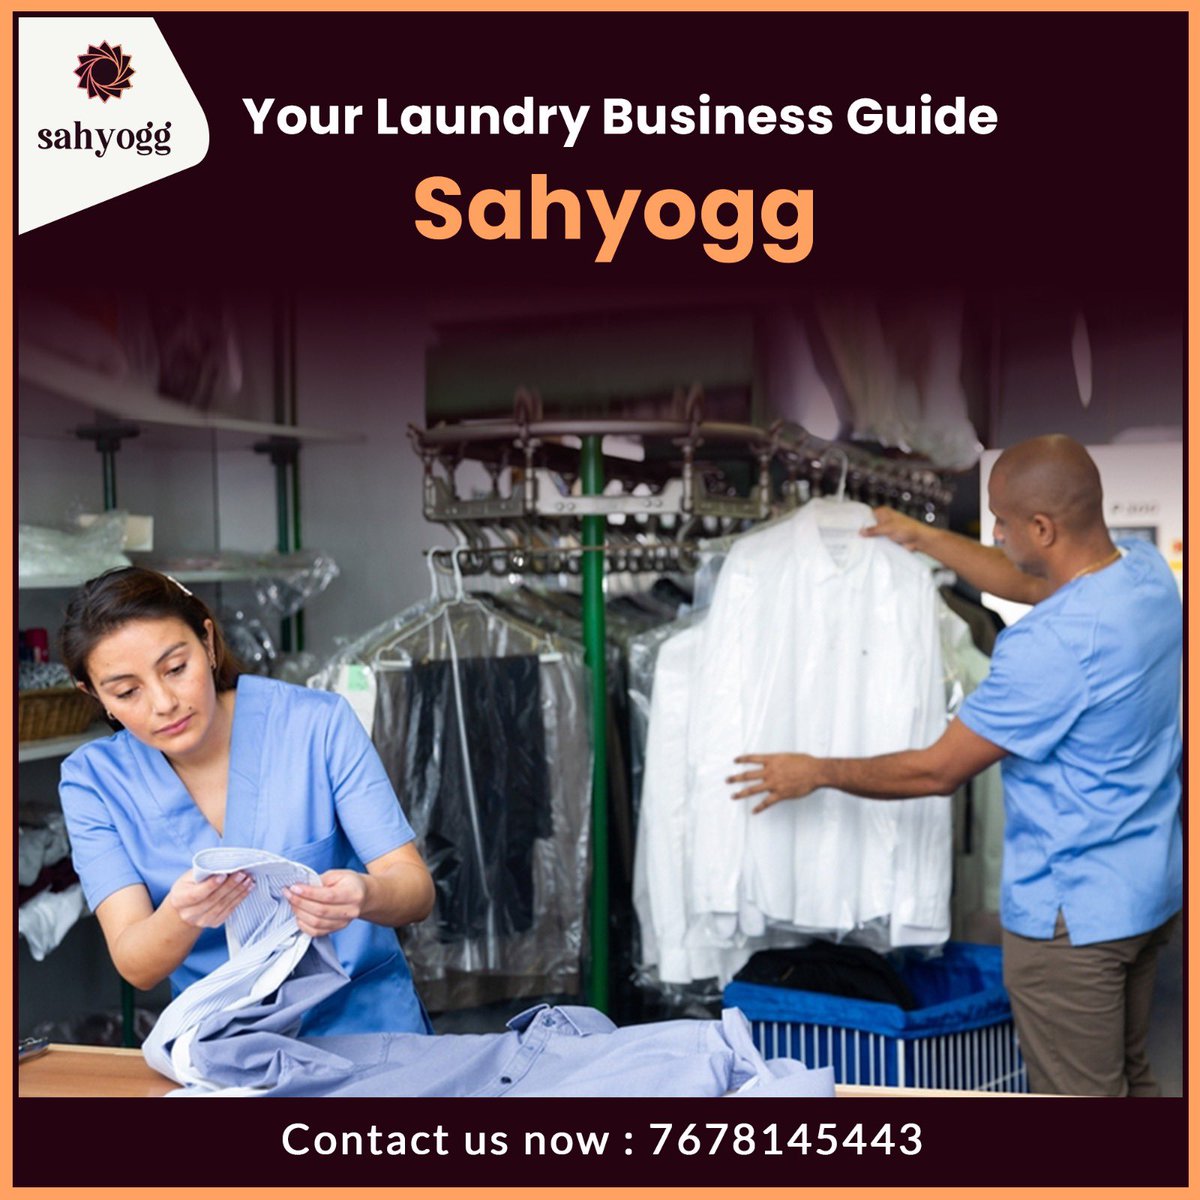 Your Laundry Business Guide - Sahyogg 

#sahyogg #businessguide #laundrybusiness #consultant